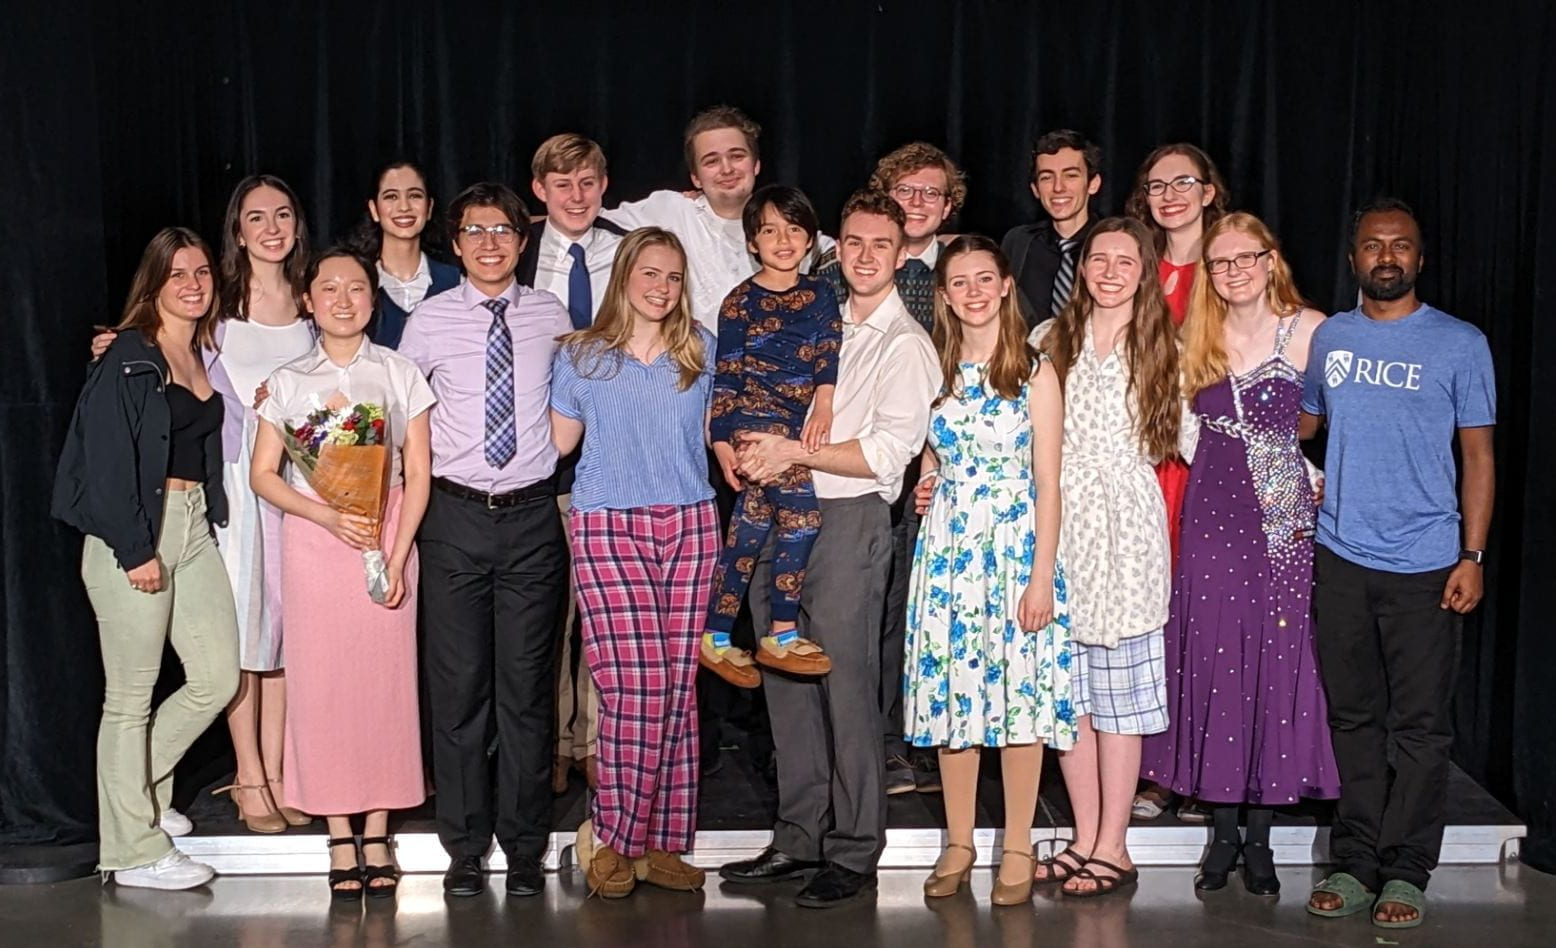 The cast and crew of Merrily We Roll Along, gathered for a picture in costume onstage